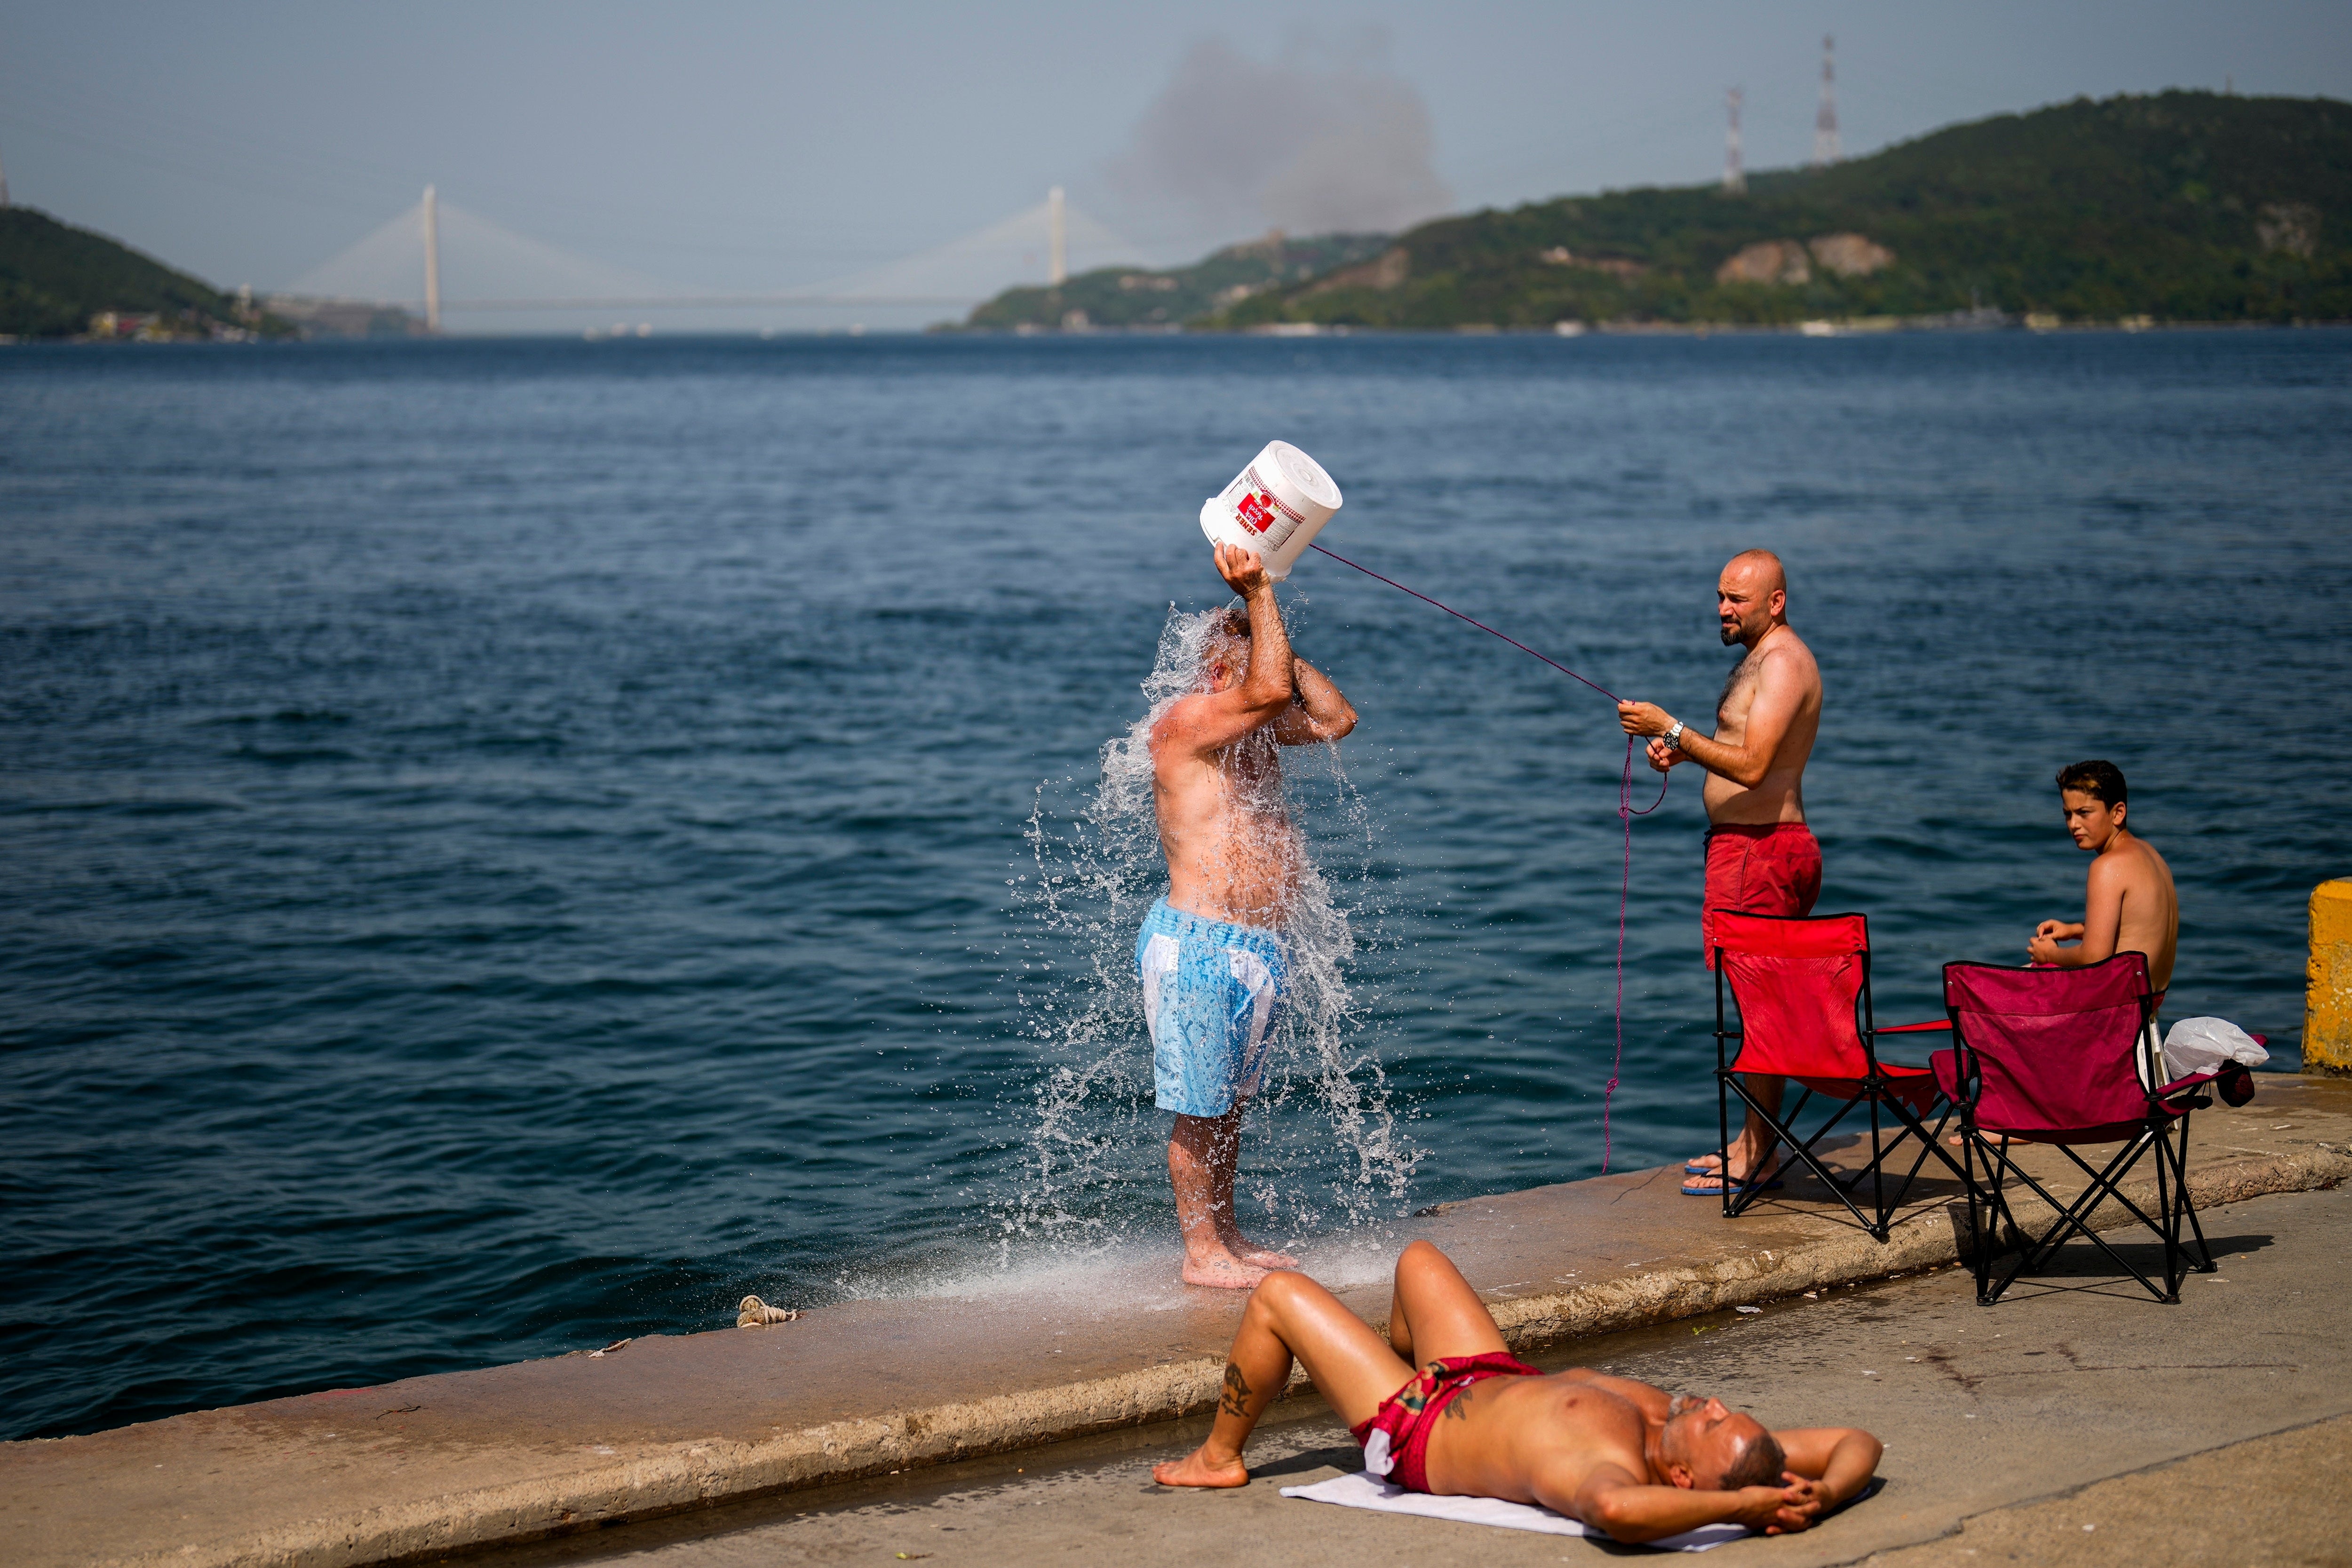 People cool off at the Bosphorus as a forest fire smoke rises, background, during a hot summer day in Istanbul